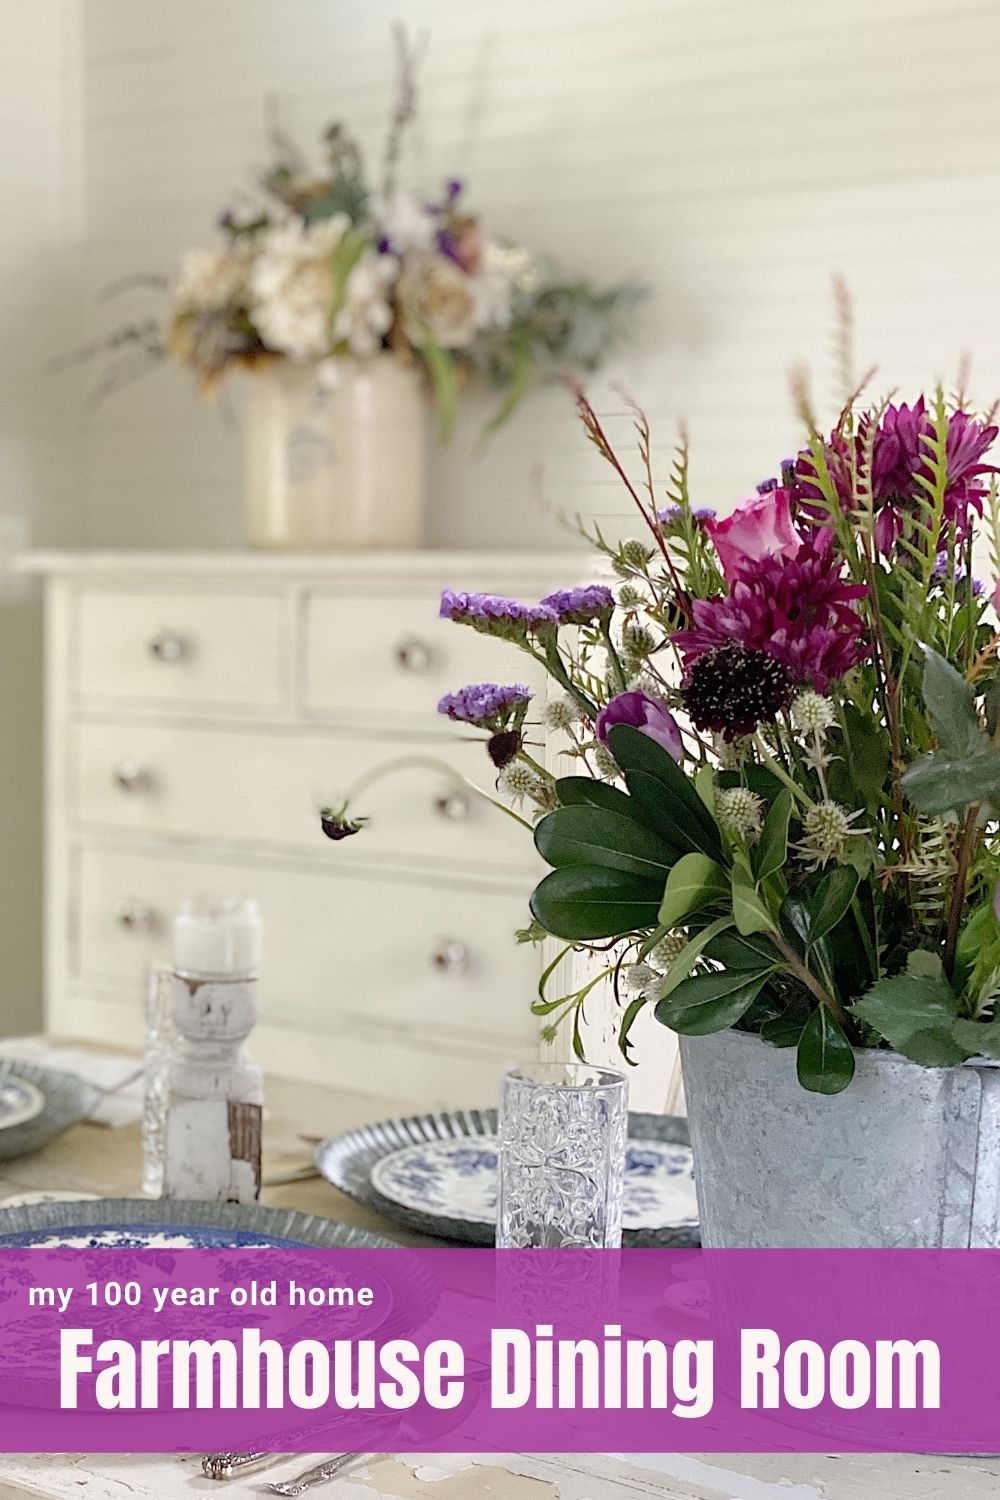 I am back to entertaining again and today I am setting up a fun party in our Carriage House. I love our farmhouse dining room and this new look!